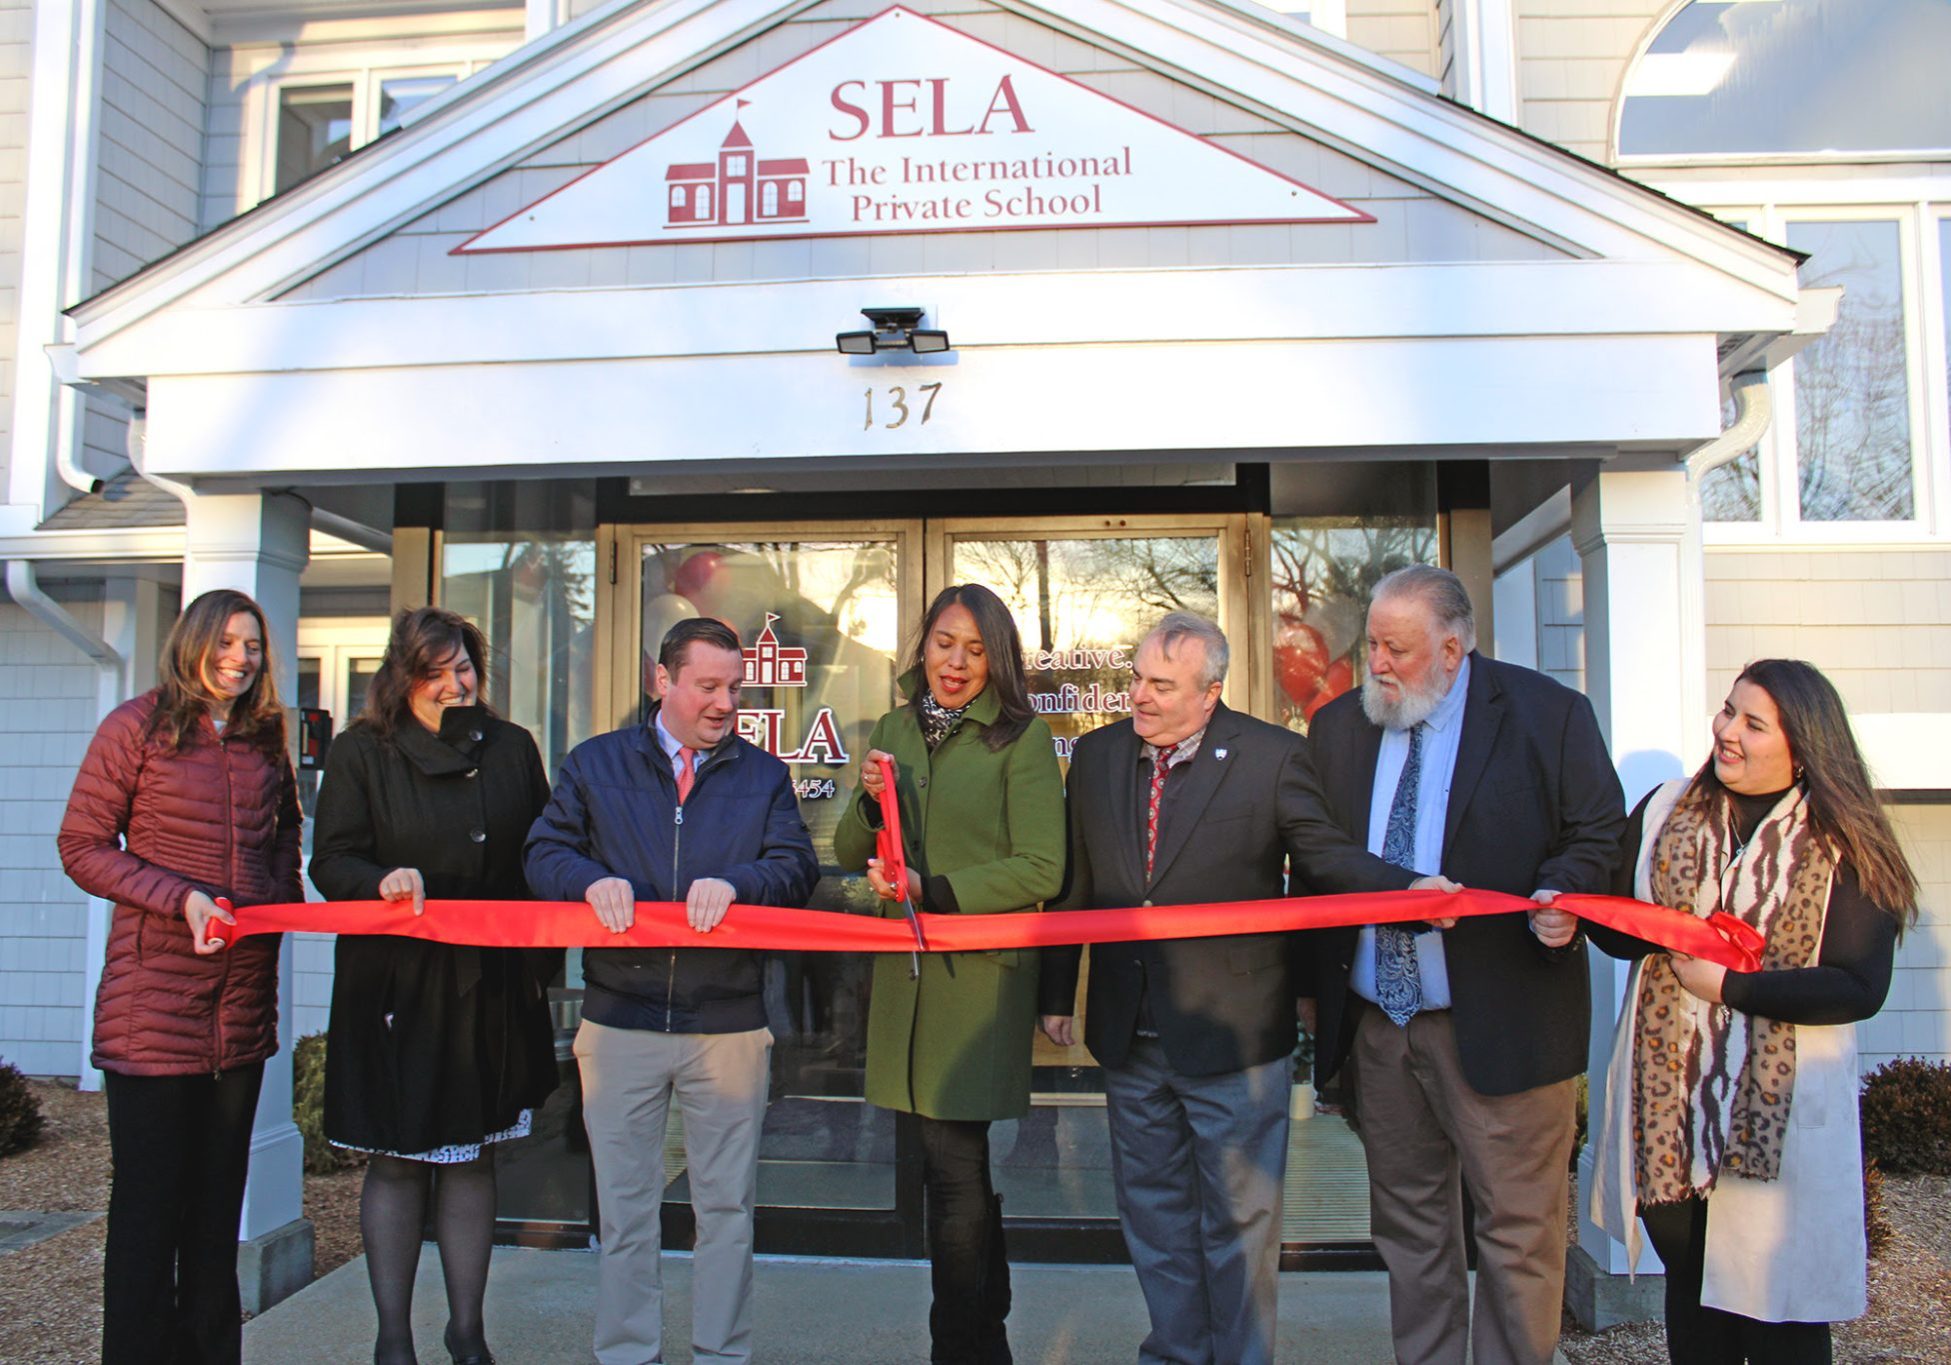 The SELA Norwell campus ribbon cutting, officiated by SELA Norwell Director of Early Global Education Stacy Dooley, Norwell Town Administrator Darleen Sullivan, State Senator Patrick O'Connor, SELA Founder Sandra Baldeon, State Representative David DeCoste, Norwell Select Board member Andy Reardon, SELA Norwell Assistant Director Eva Rios, courtesy image